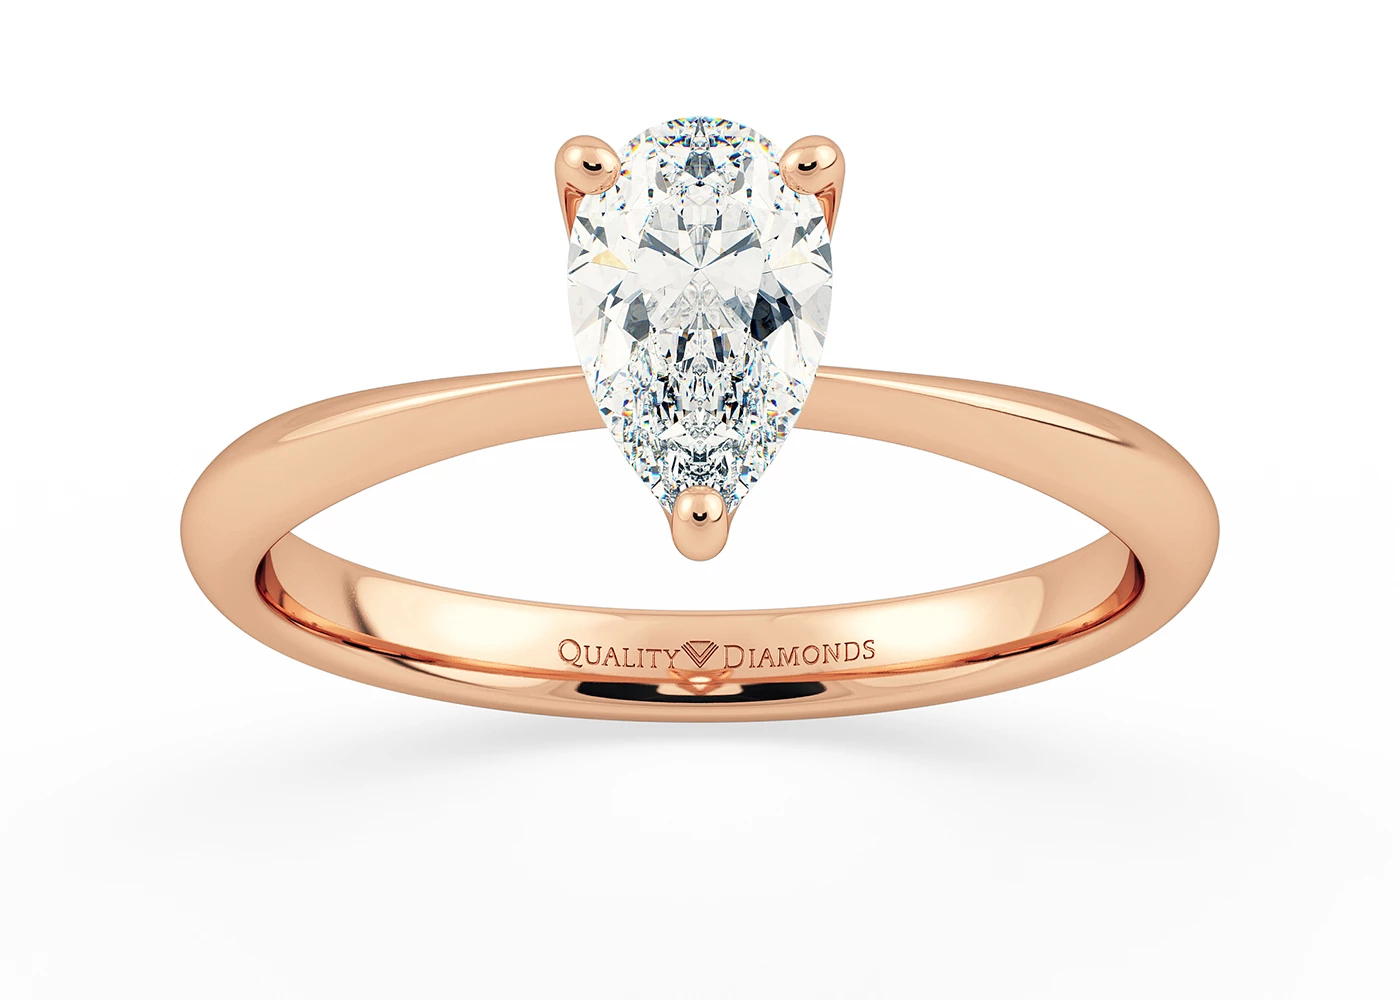 Half Carat Pear Solitaire Diamond Engagement Ring in 18K Rose Gold